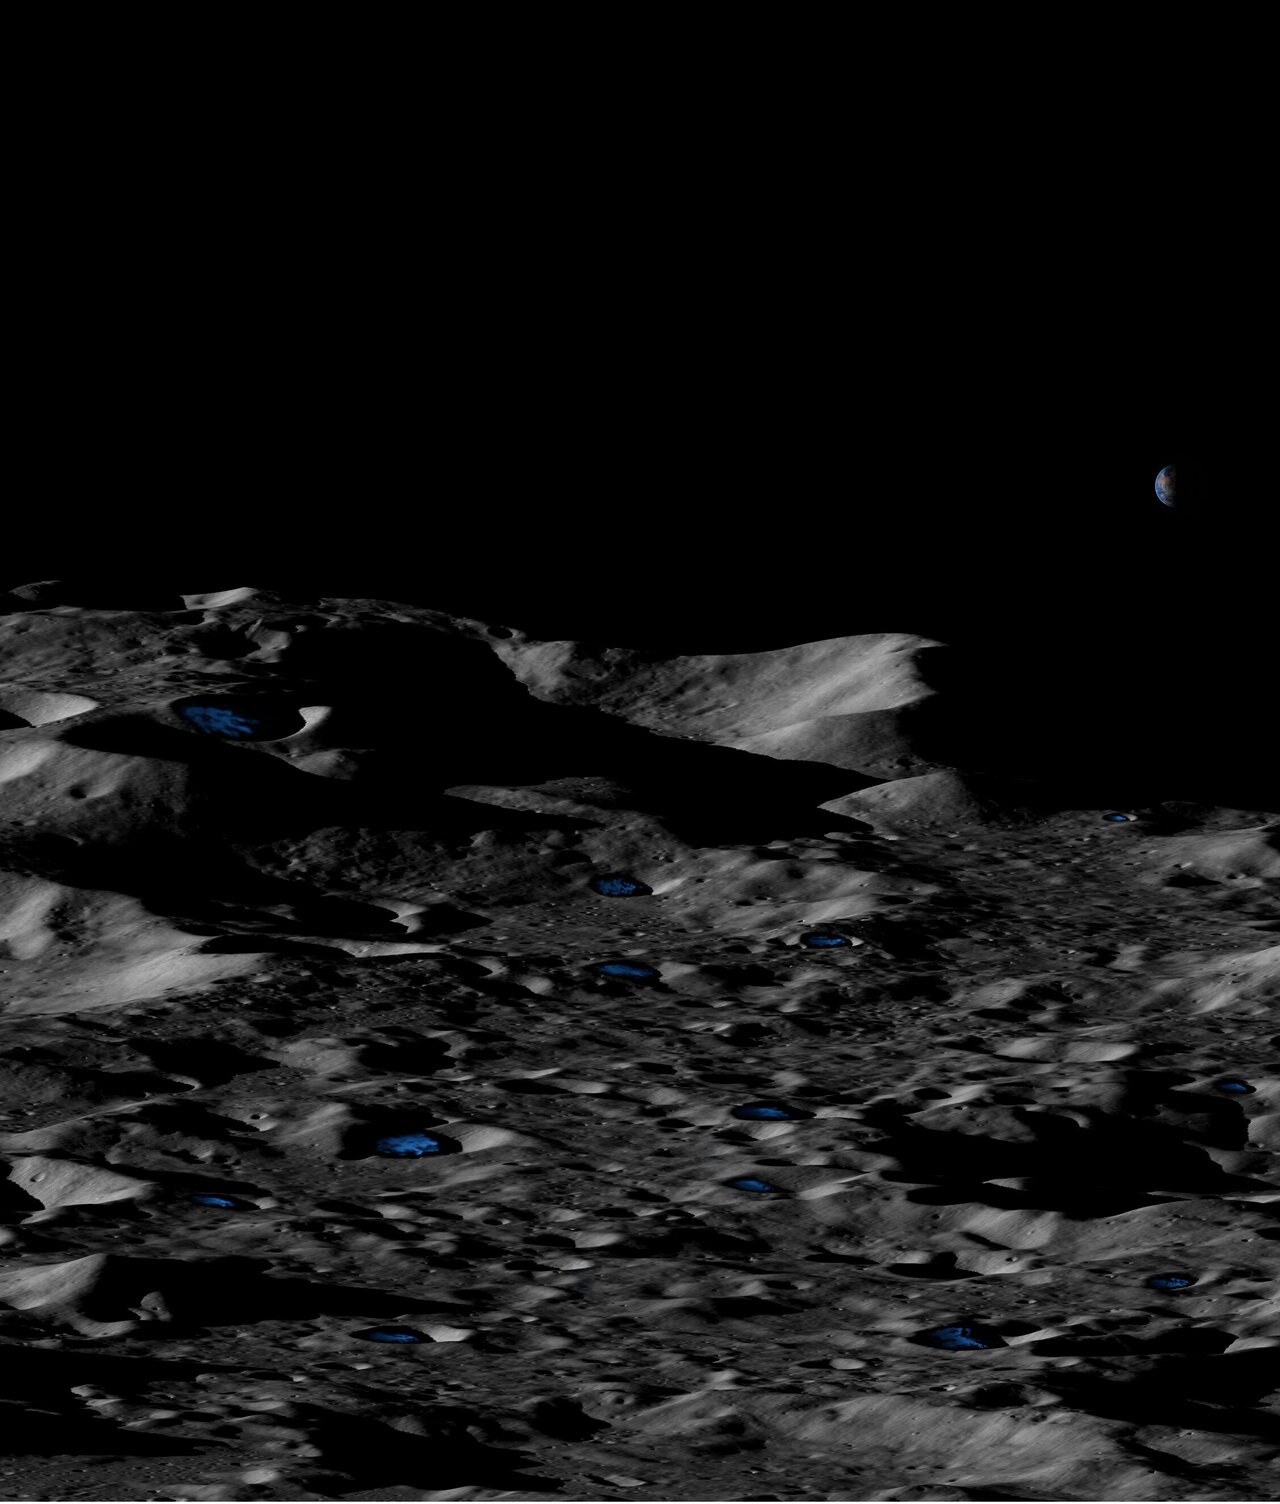 Study Suggests Much More Water On The Moon Than Thought Update